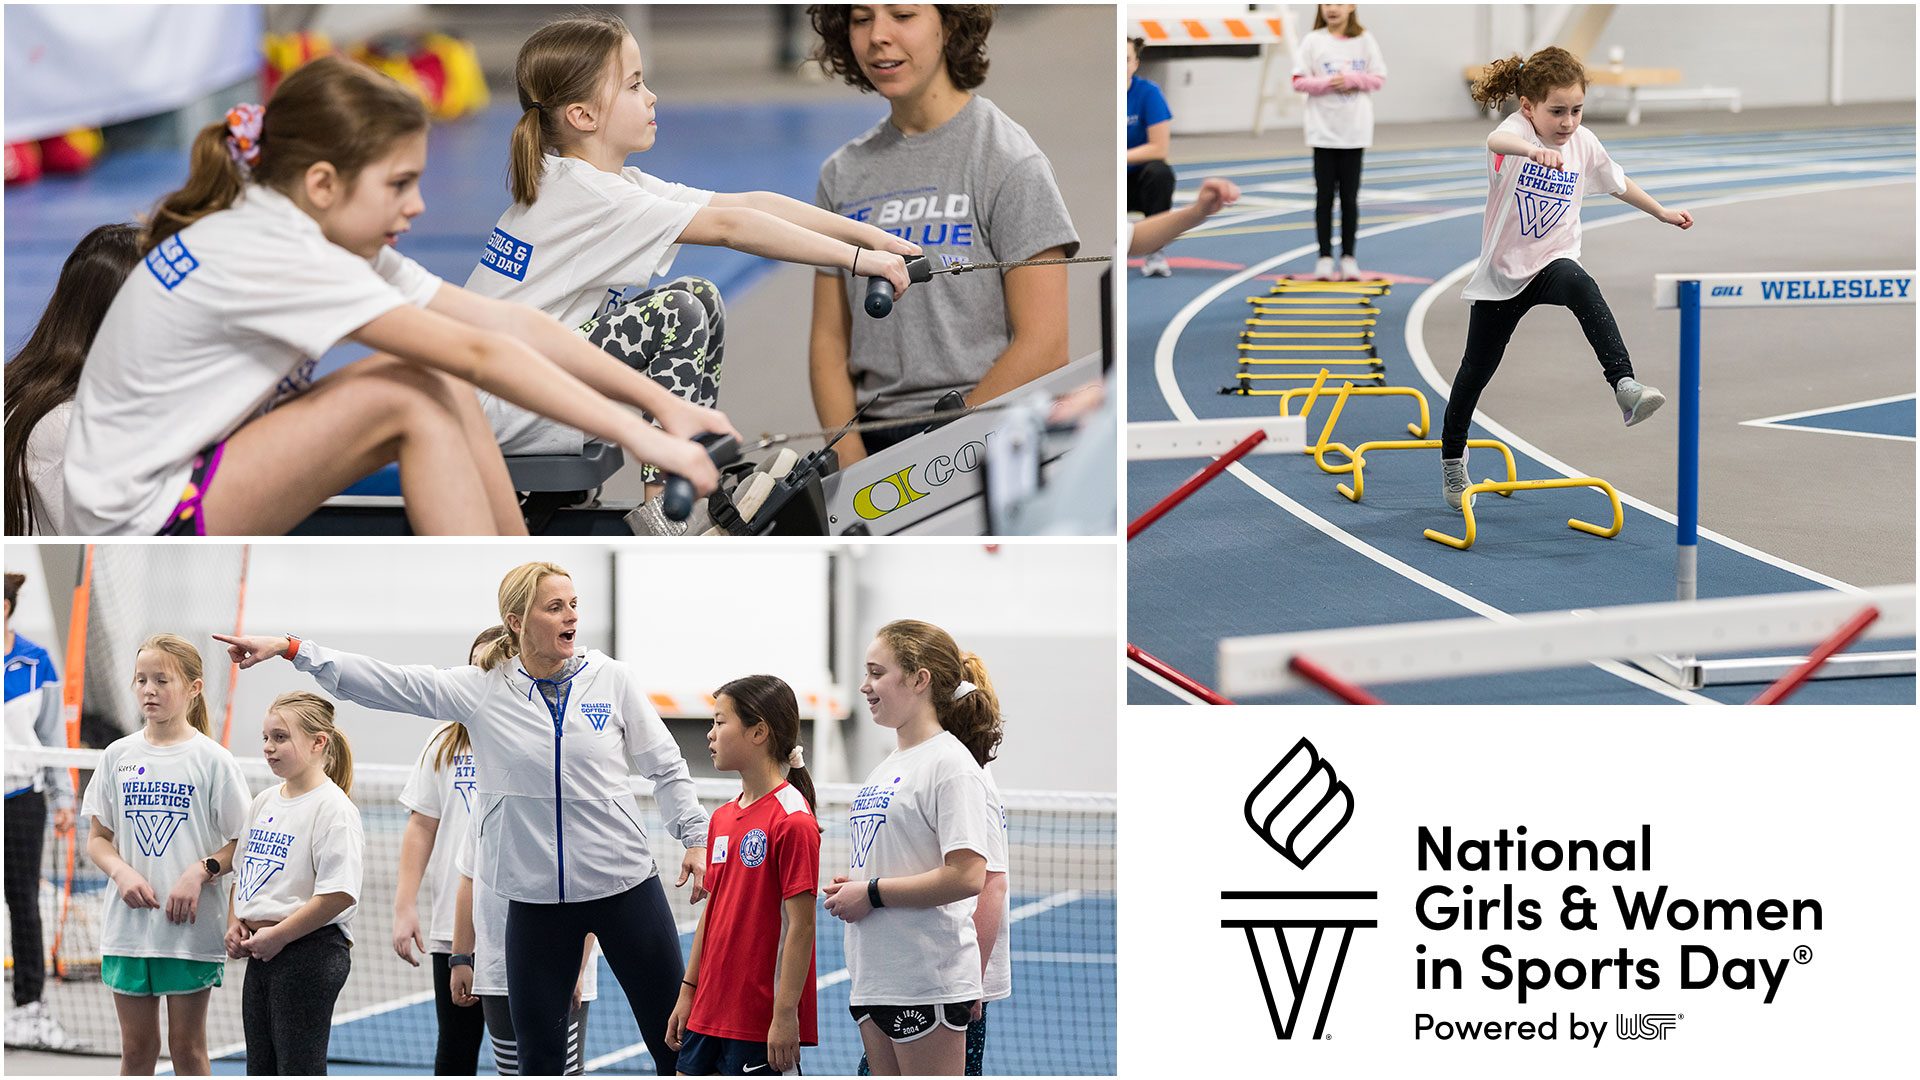 National Girls & Women in Sports Day, girls athletes running, rowing and participating in a sports clinic.